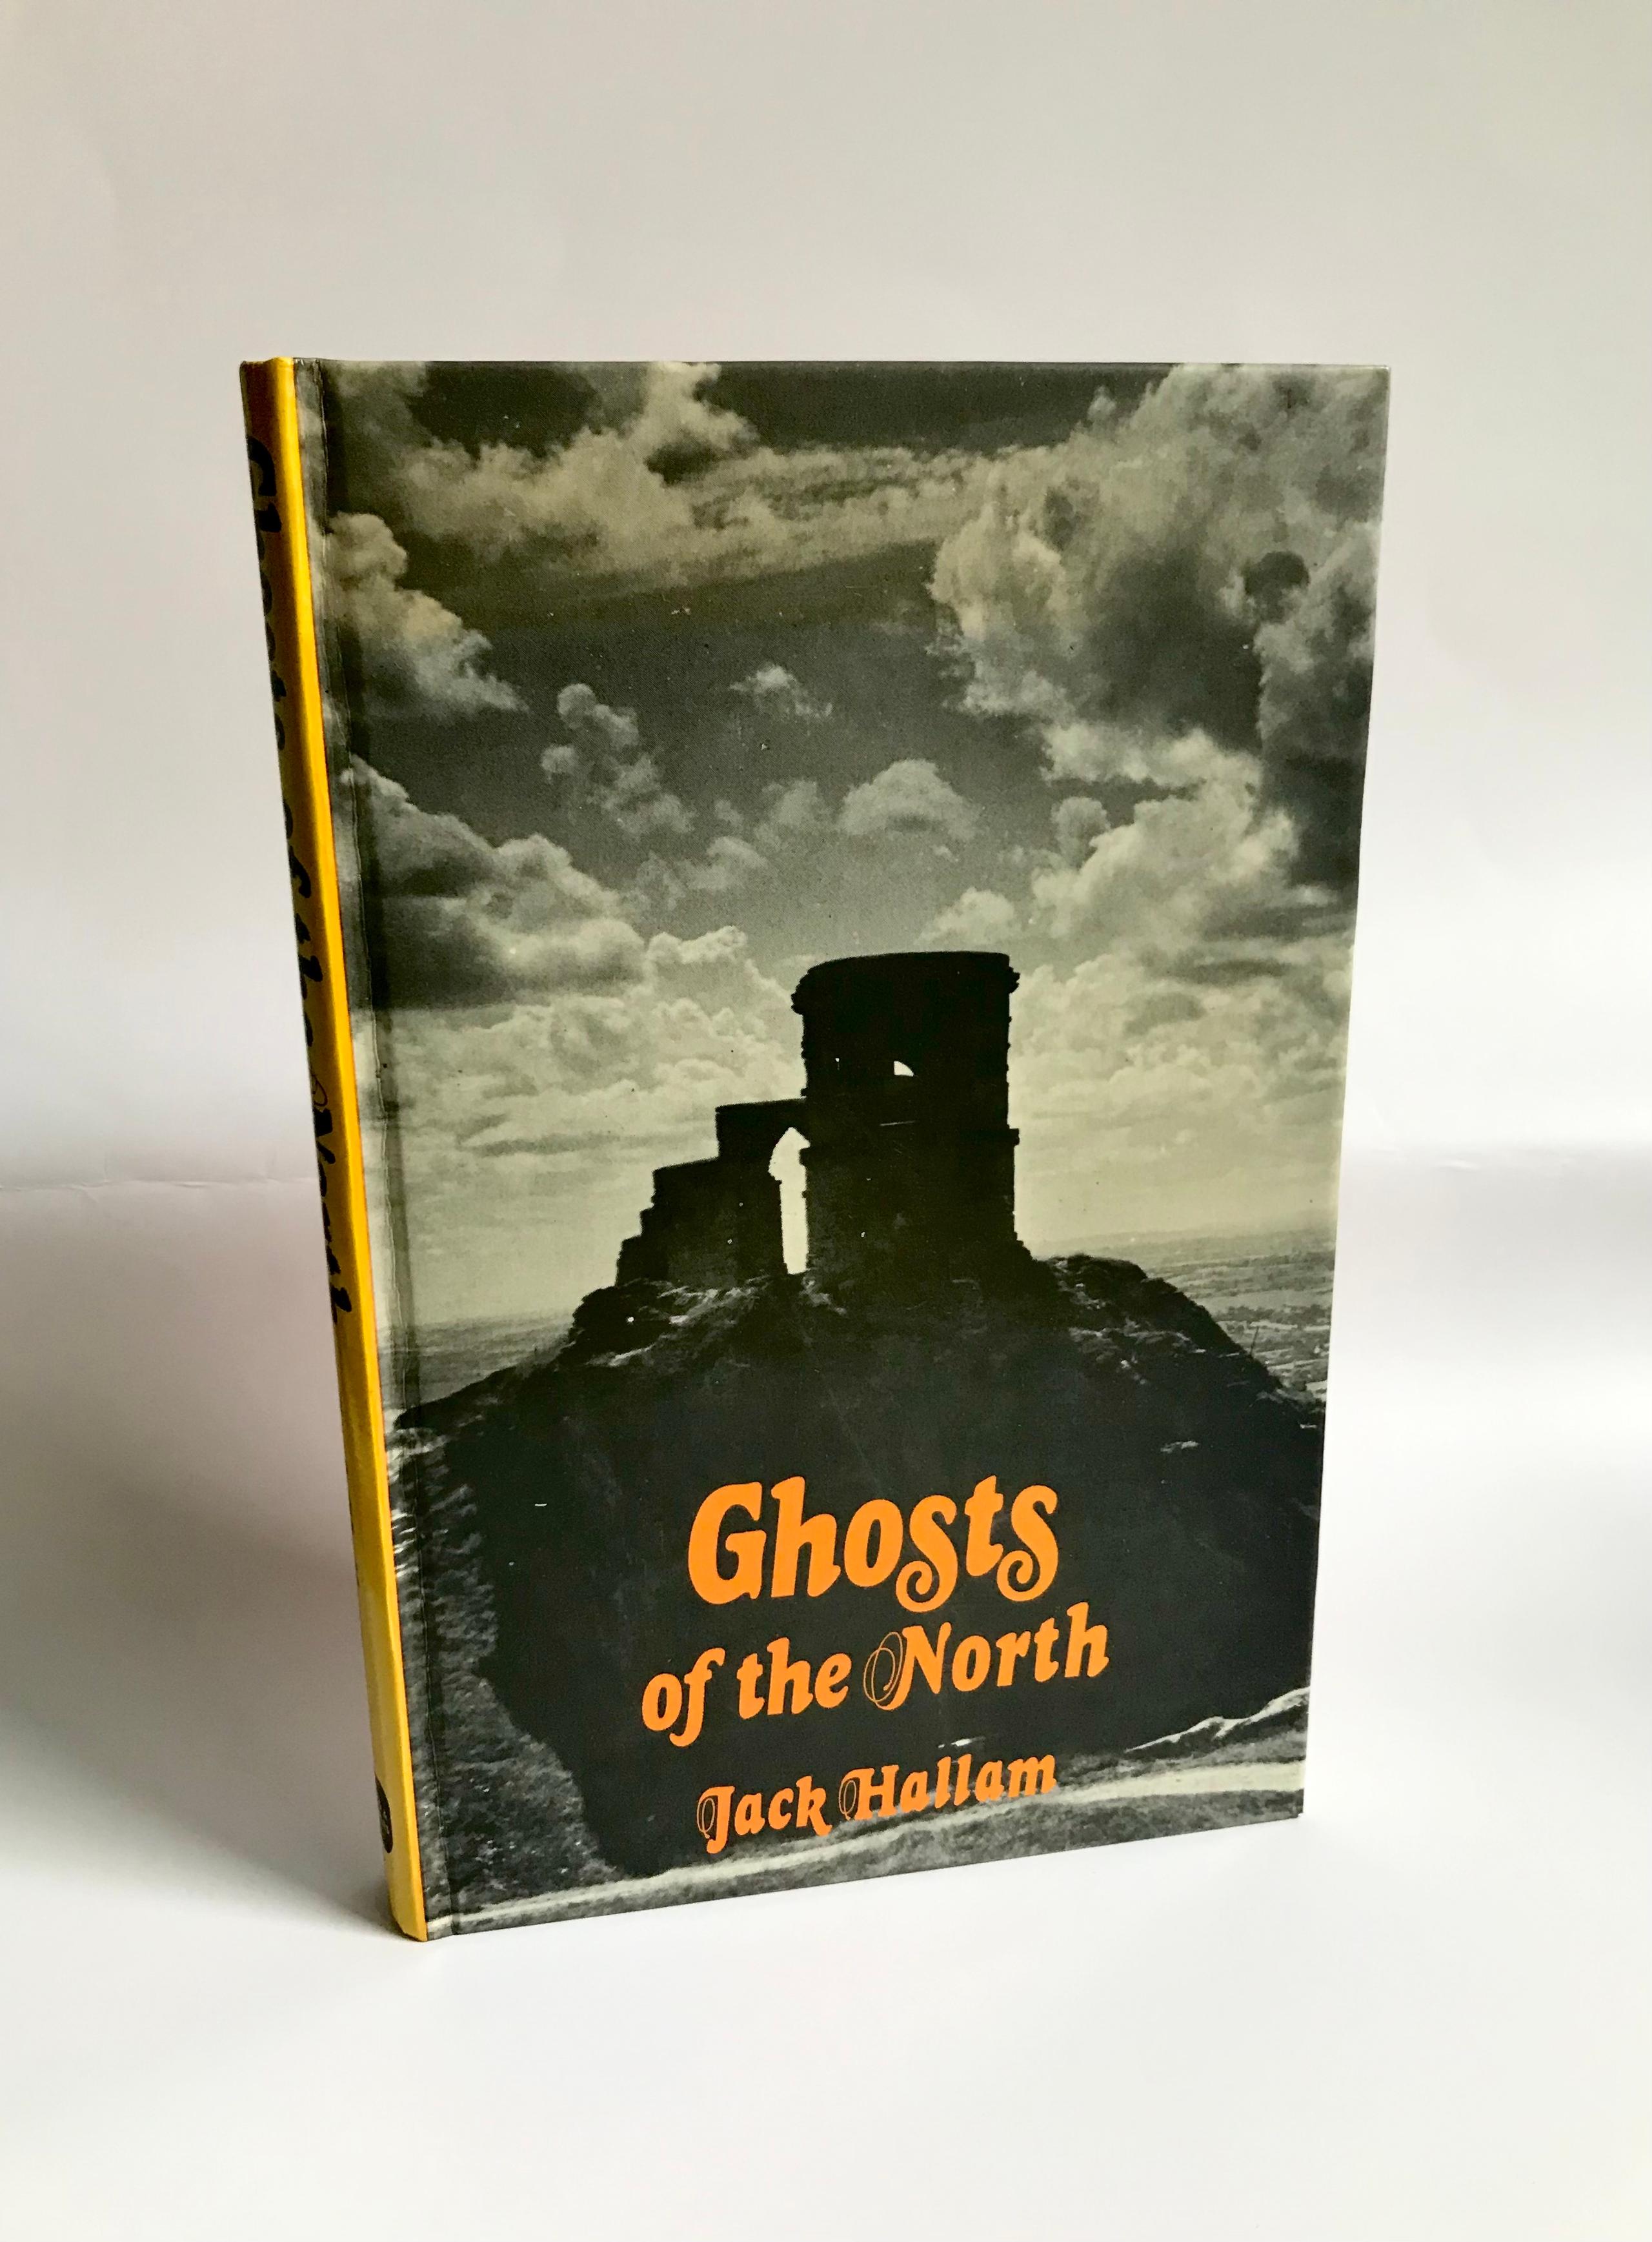 Ghosts of the North by Jack Hallam